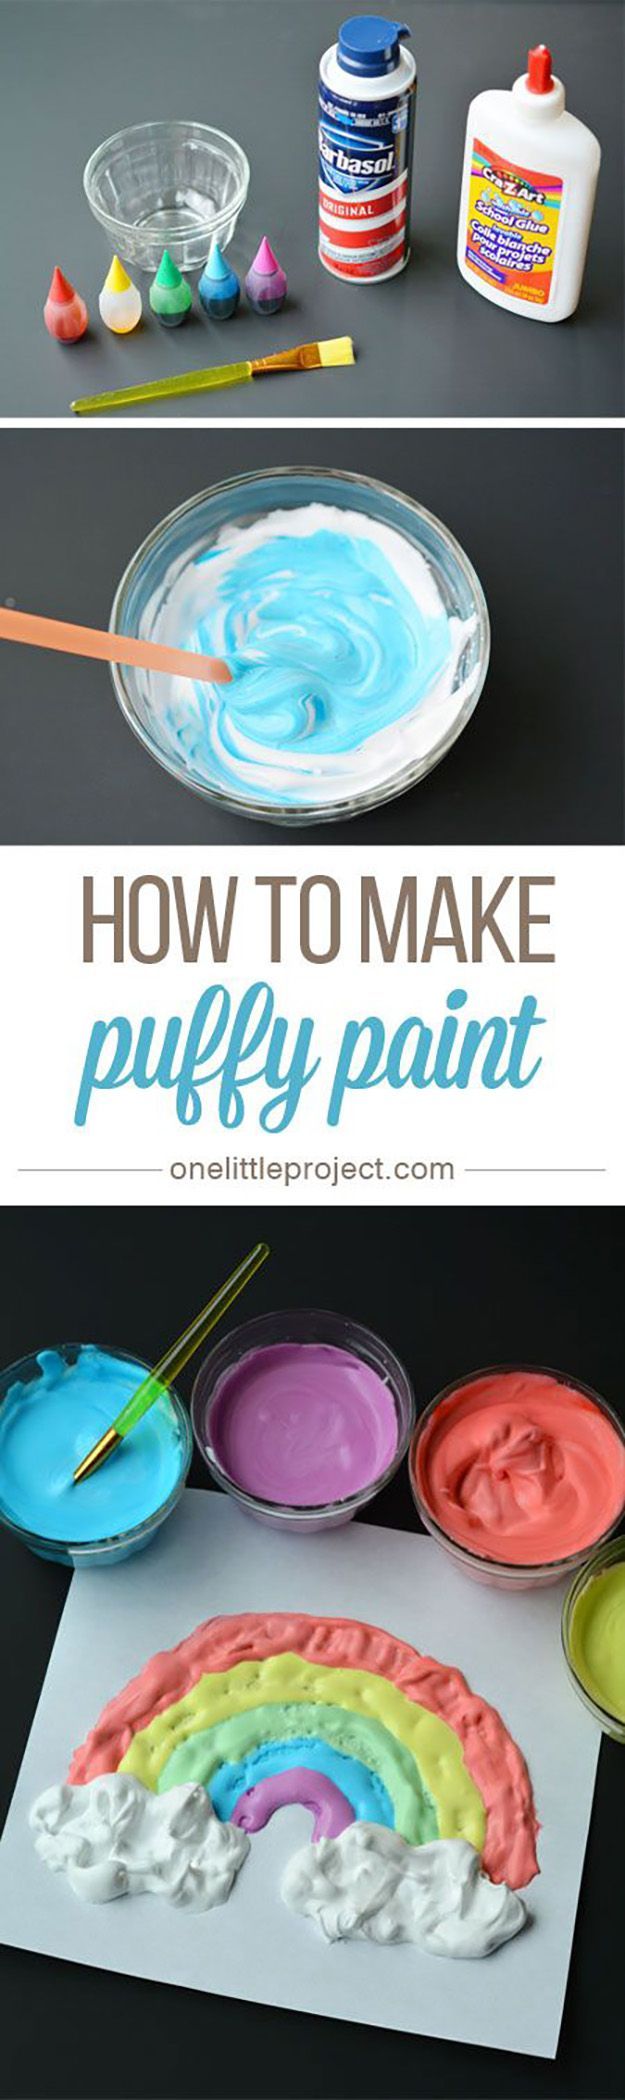 Simple Crafts for Kids to Make | DIY Puffy Paint Tutorial | Easy DIY Craft Ideas for Kids| DIY Smoothie Paint | DIY Projects &